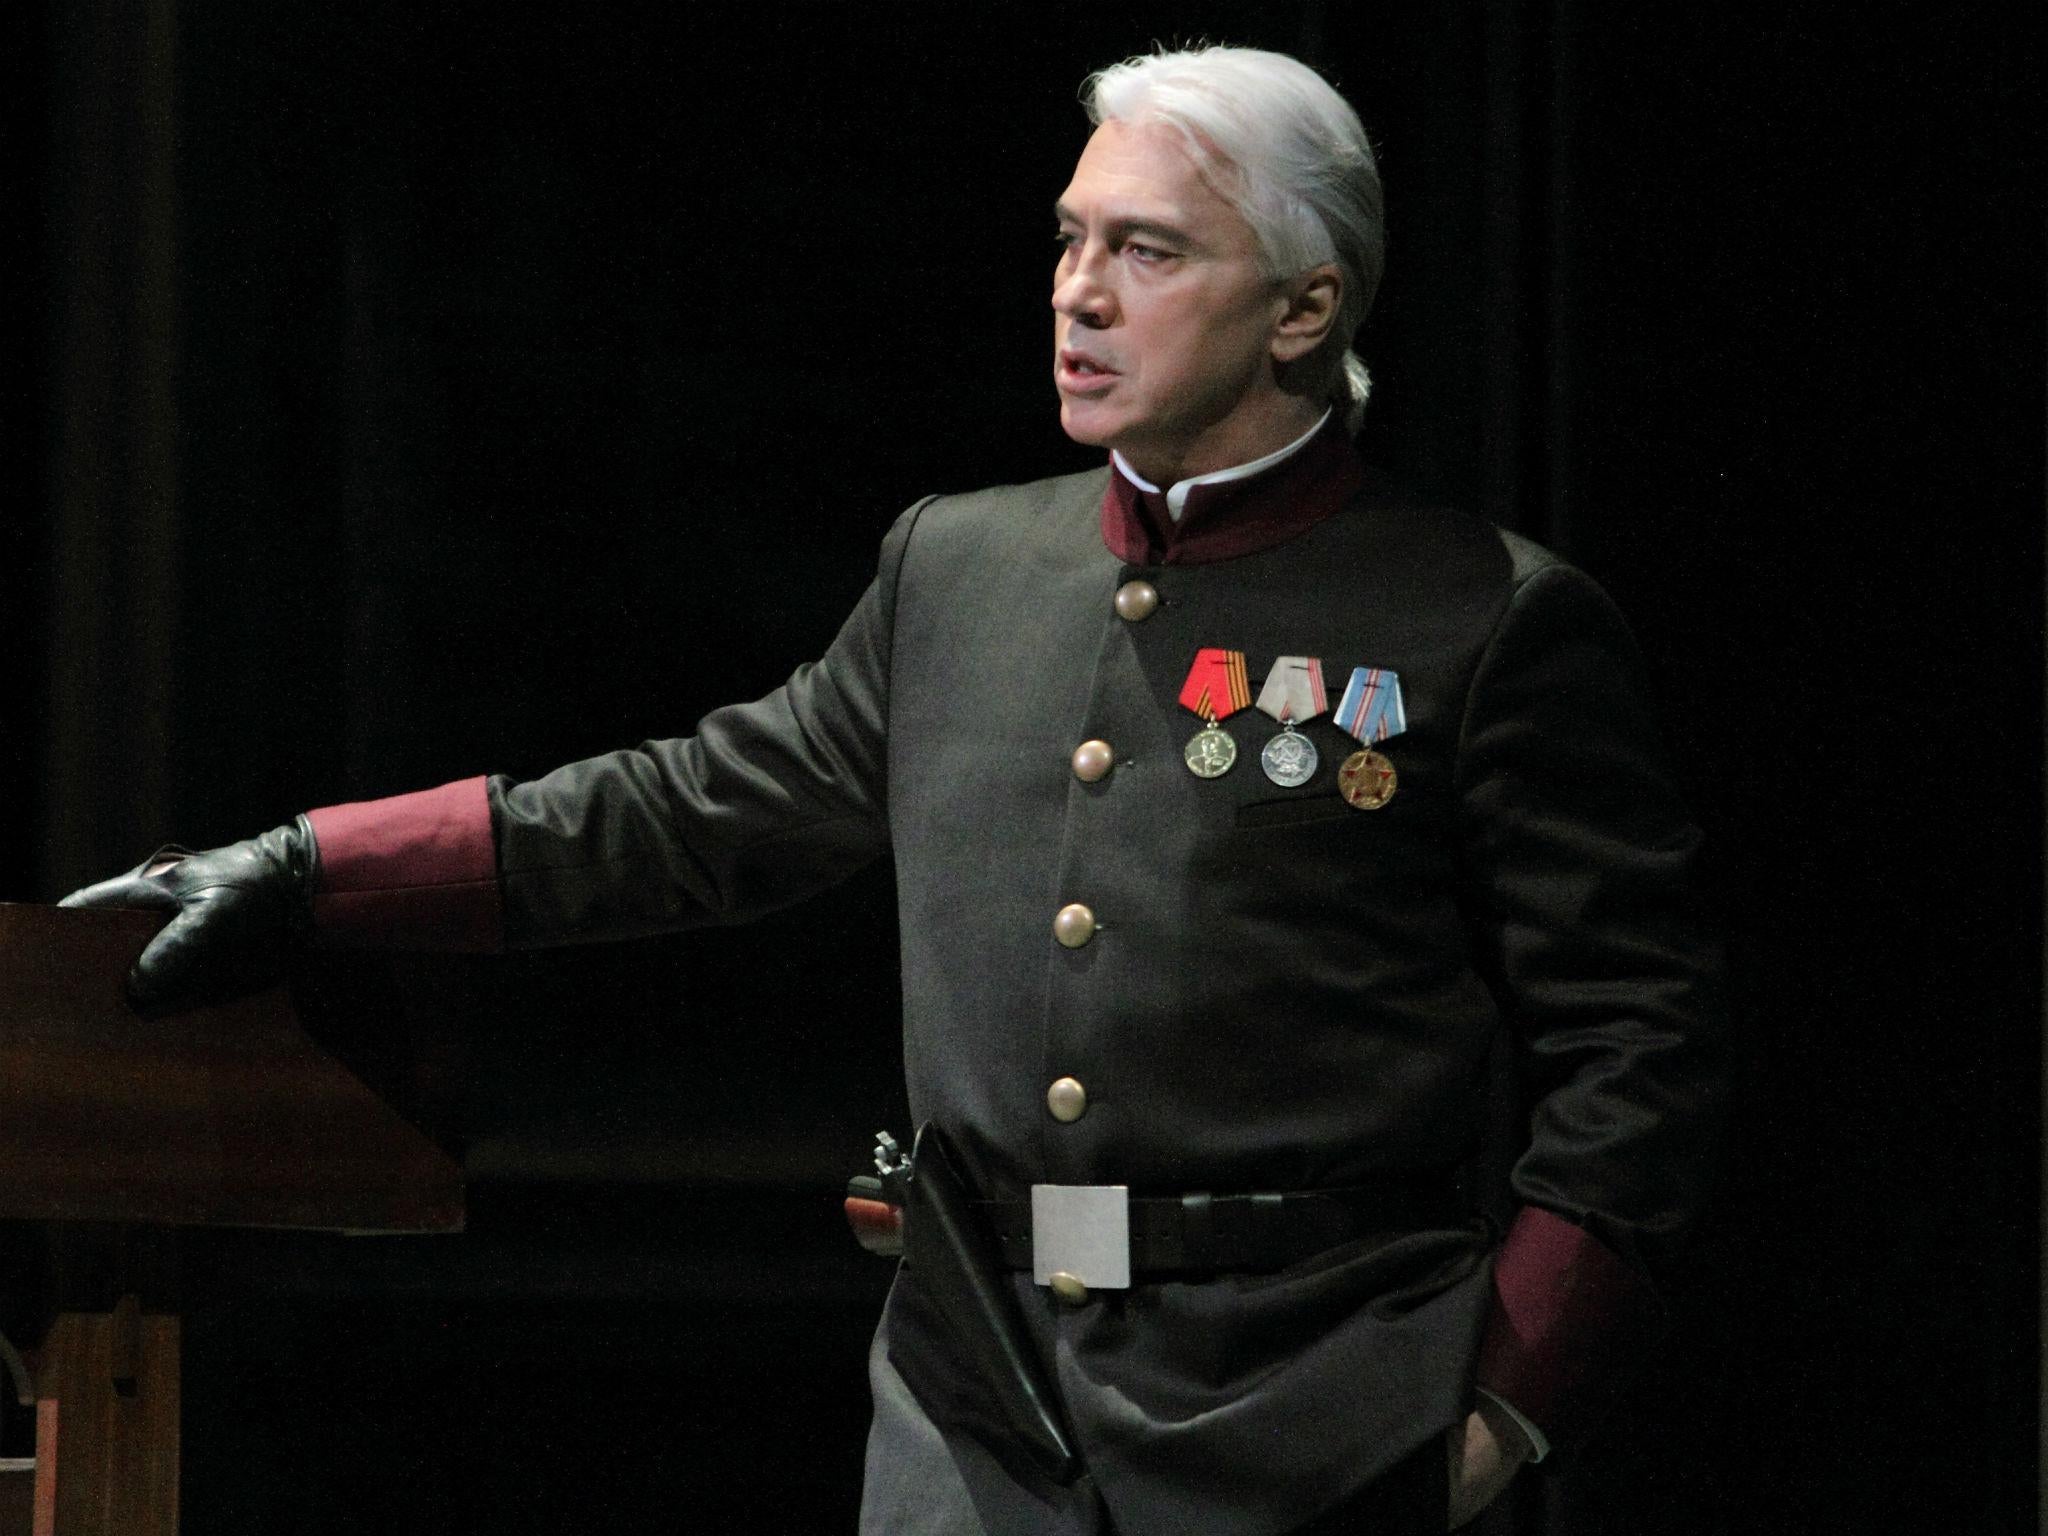 The recent death of Russian baritone Dmitri Hvorostovsky, to whom the evening was dedicated, cast an inevitable pall over proceedings